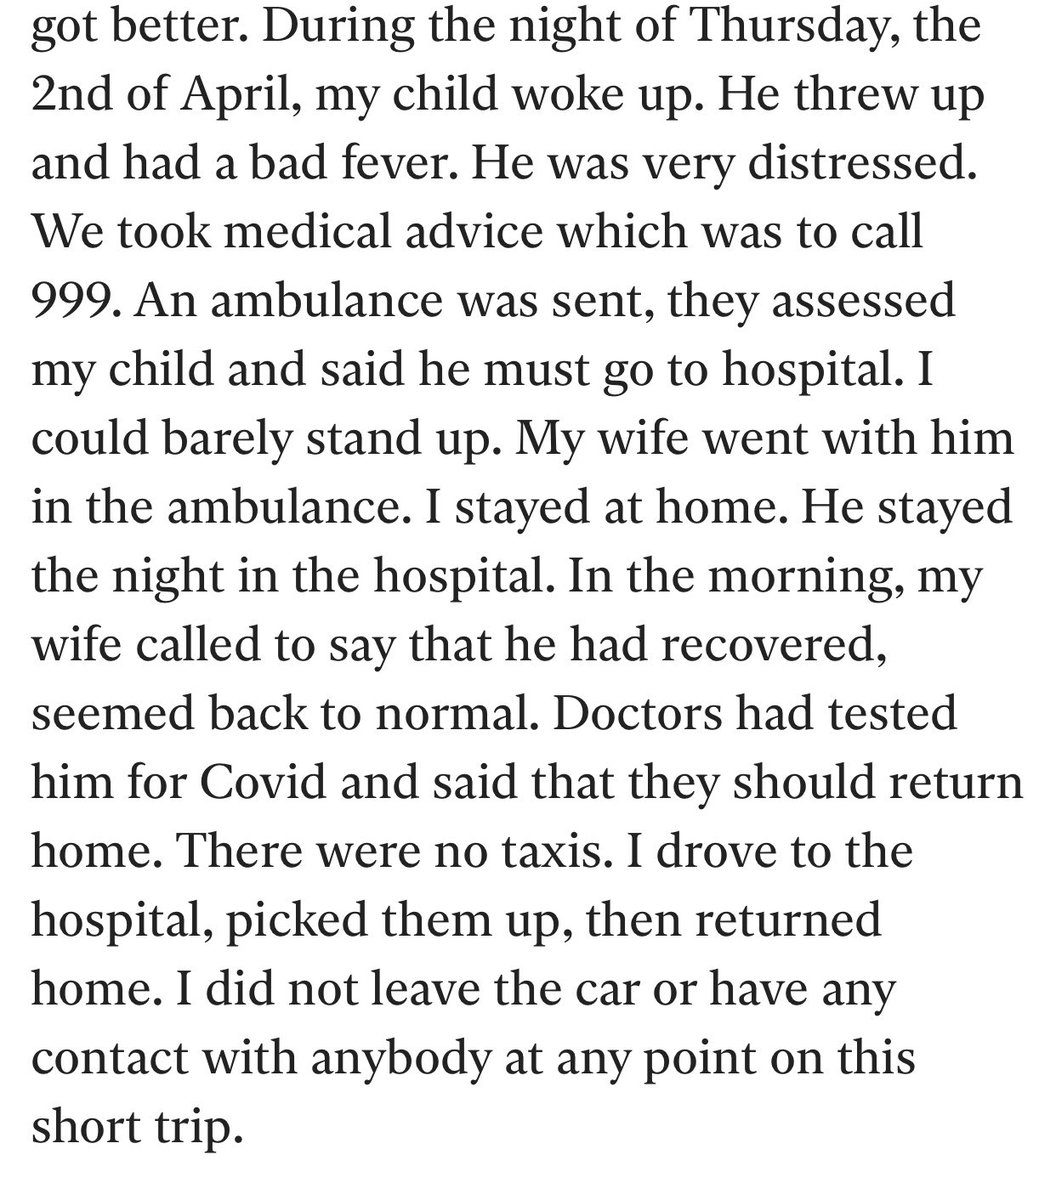 12/23 If you could barely stand up,had muscle spasms with limited breathing would you not be too impaired to drive & pick up your wife & child? thus risking them & members of the public? You must have discussed the  @spectator piece of 25 April & Daily Mail with your wife?